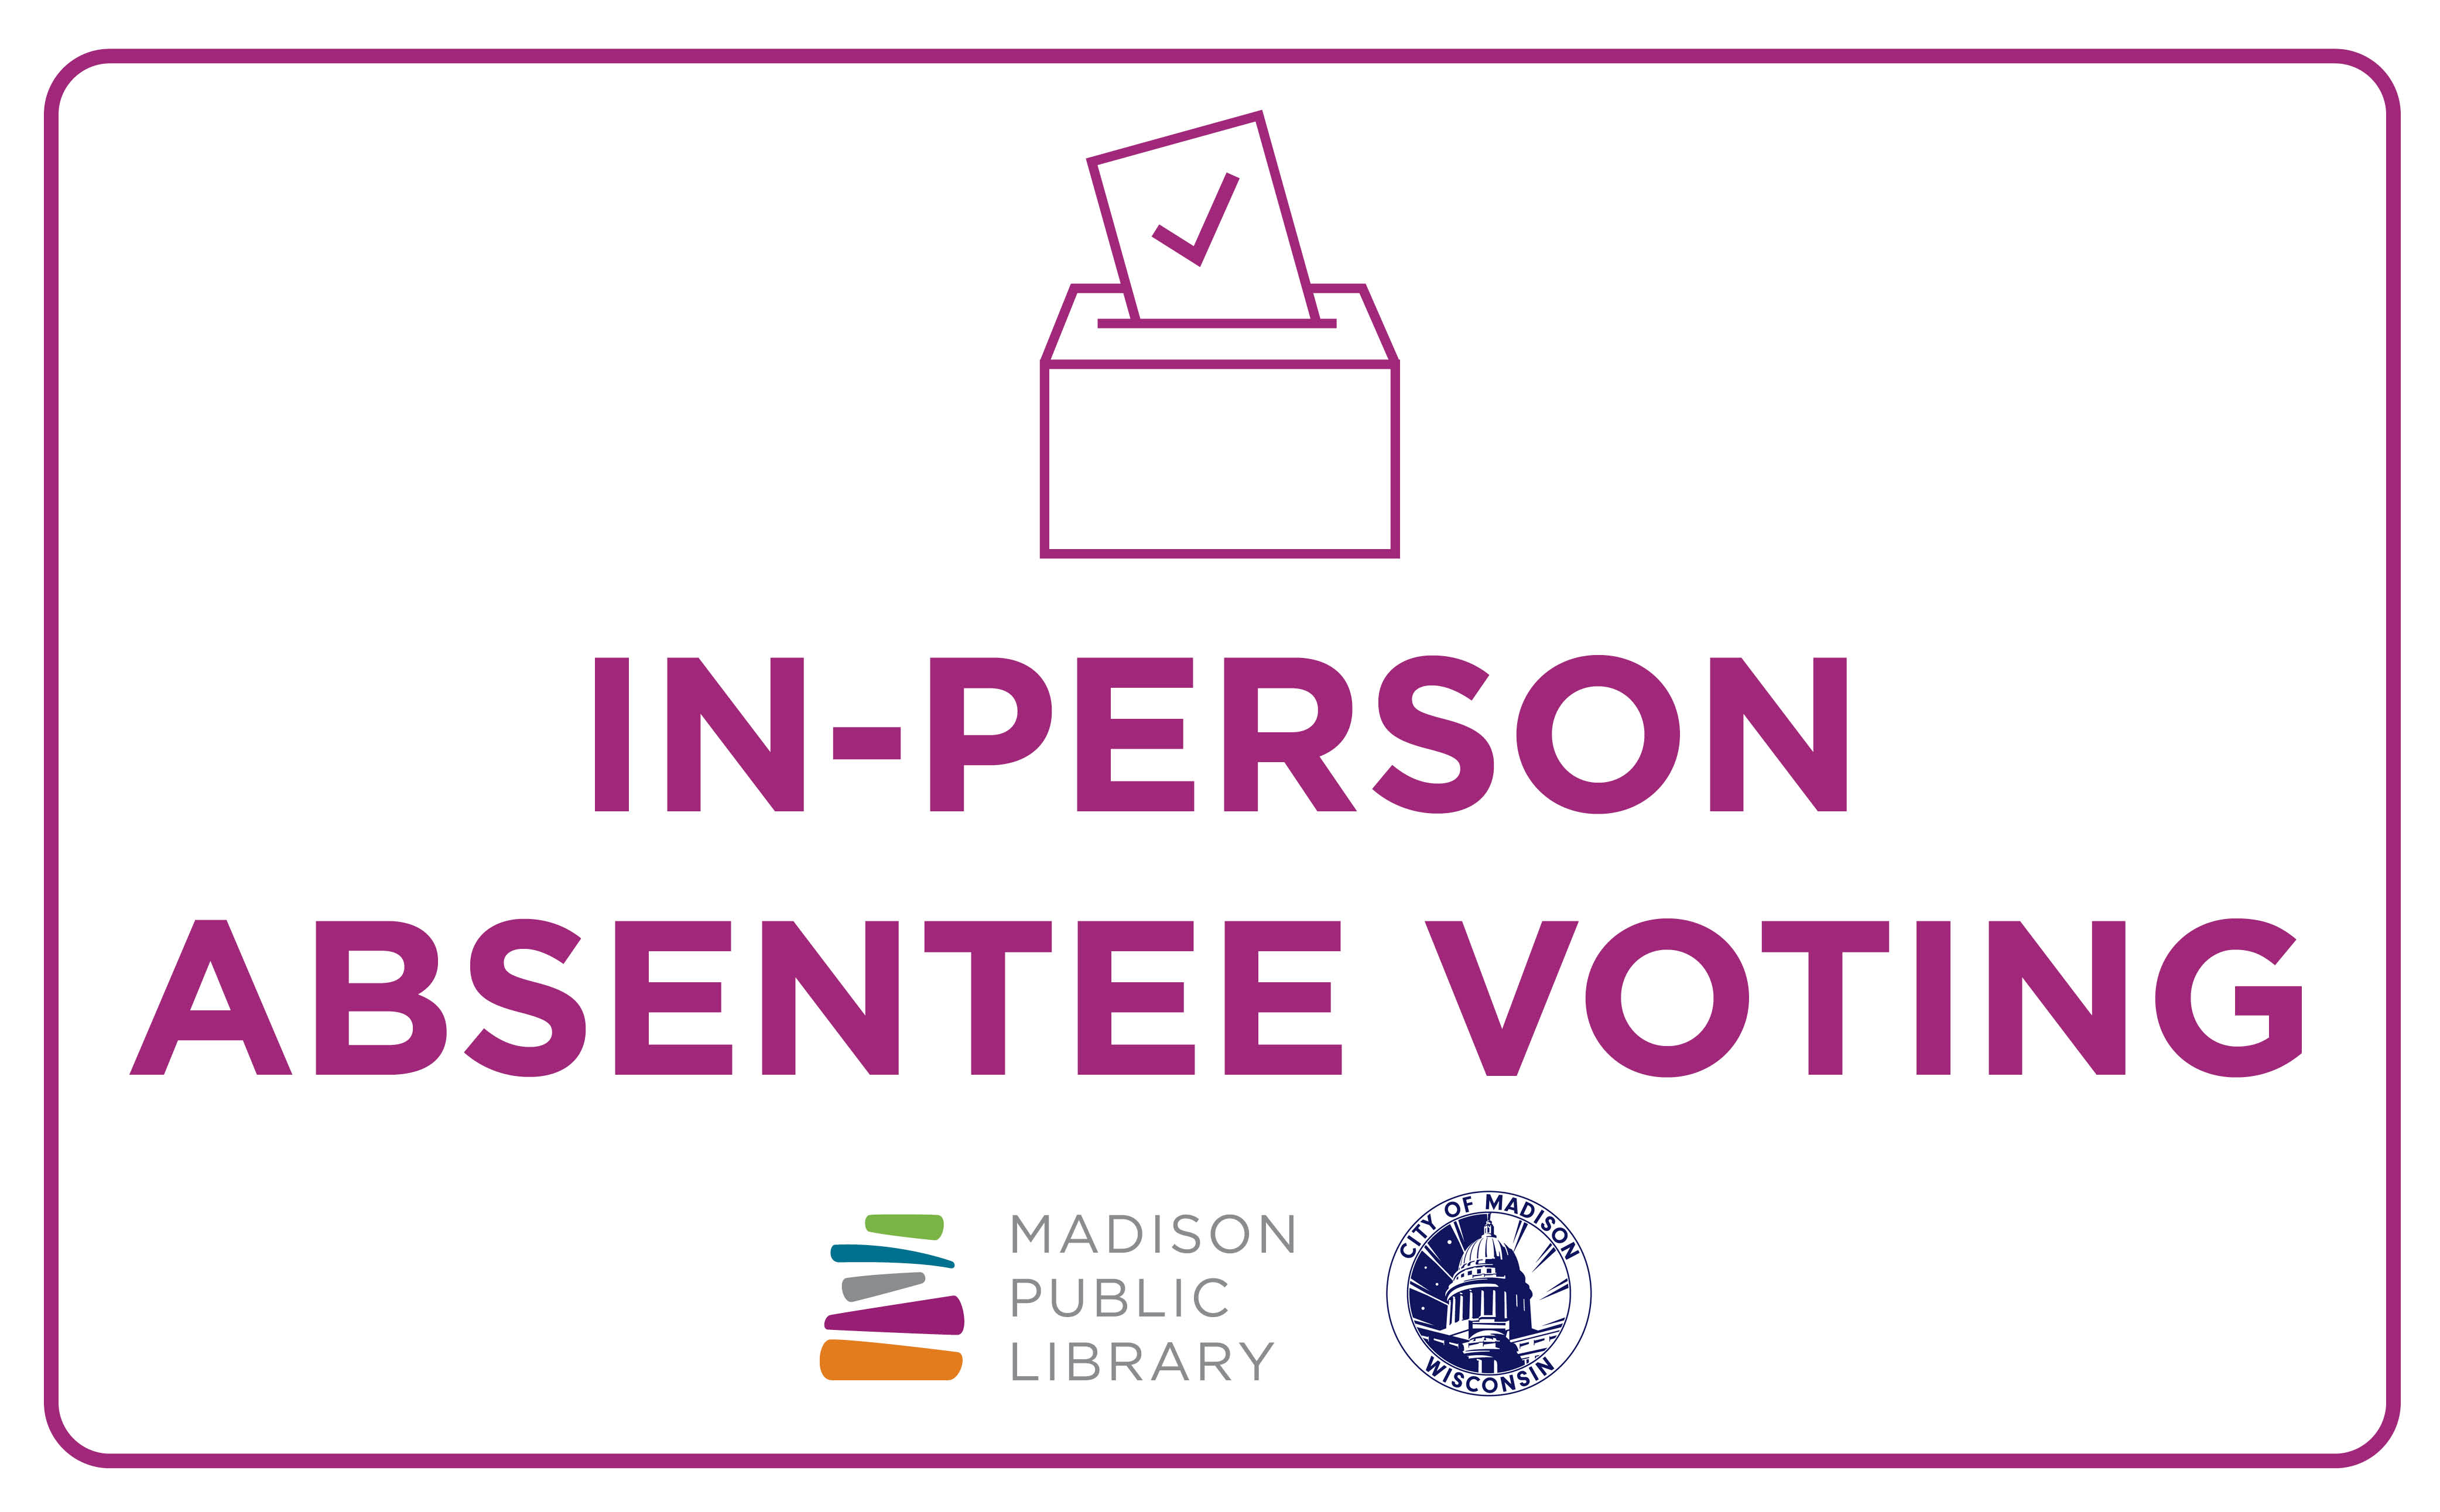 All Madison Public Library locations have in-person absentee voting options for the Spring Primary March 19-31 2024